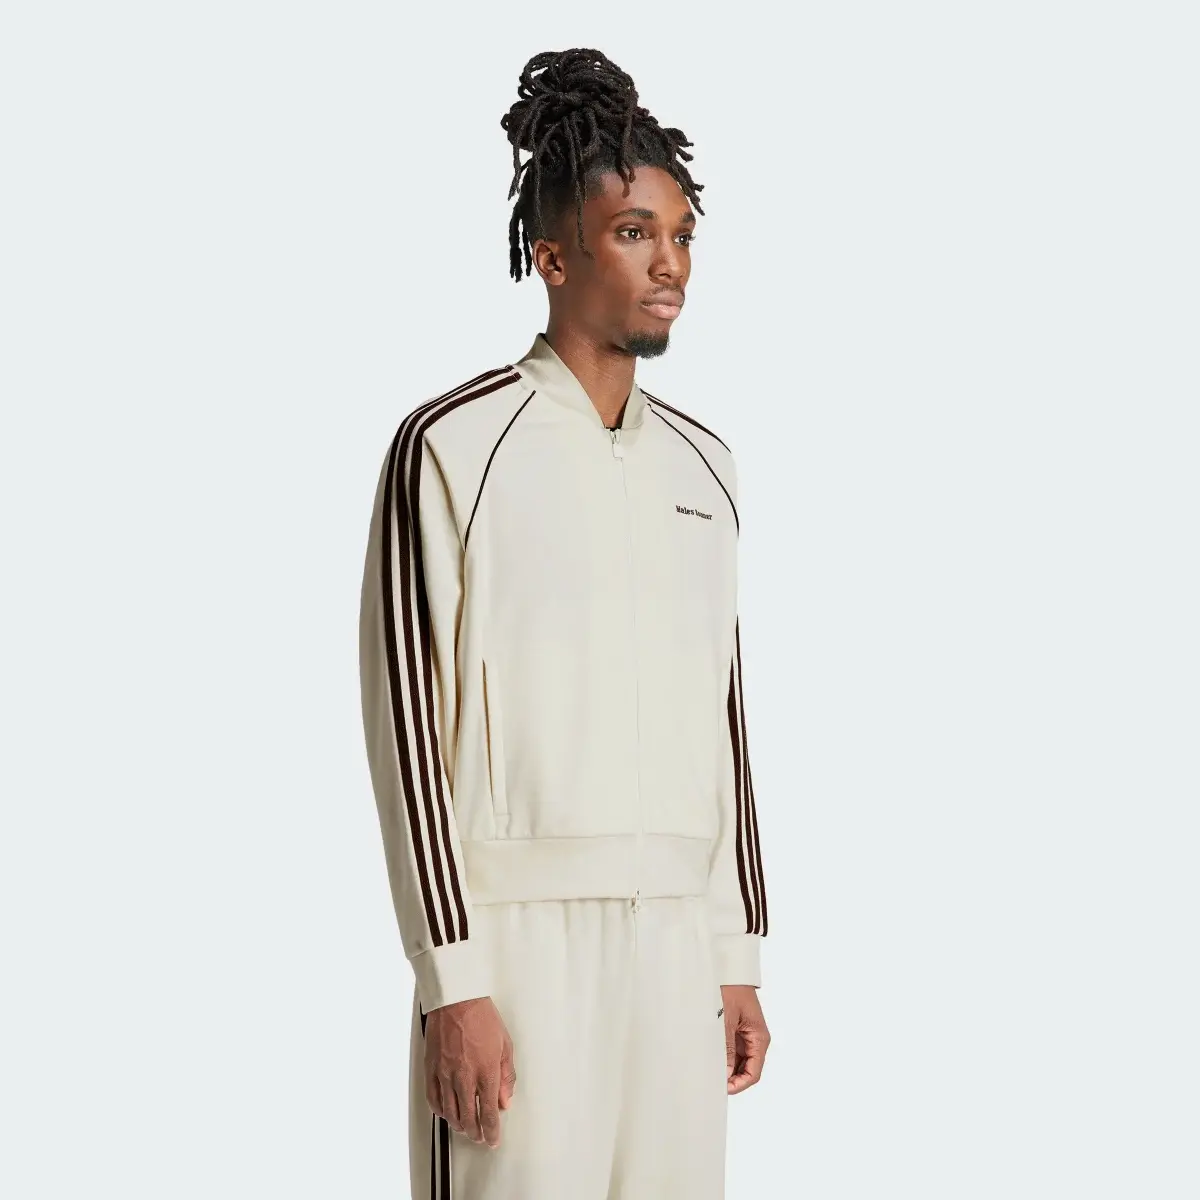 Adidas Wales Bonner Statement Track Top. 3